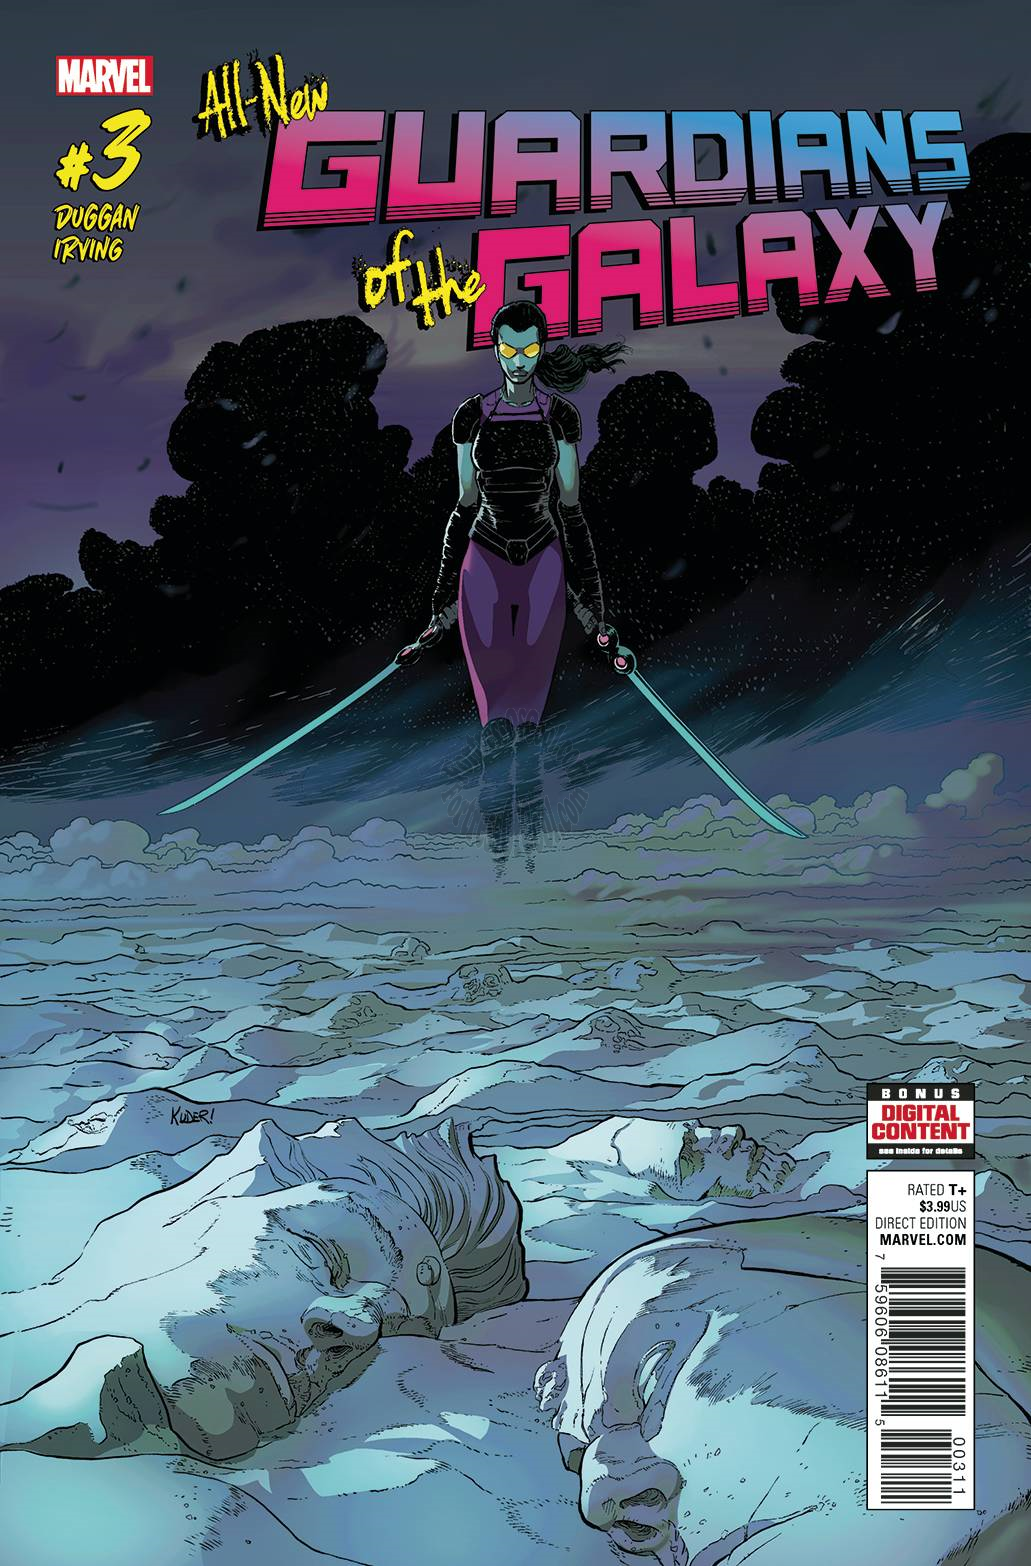 All New Guardians of the Galaxy #3